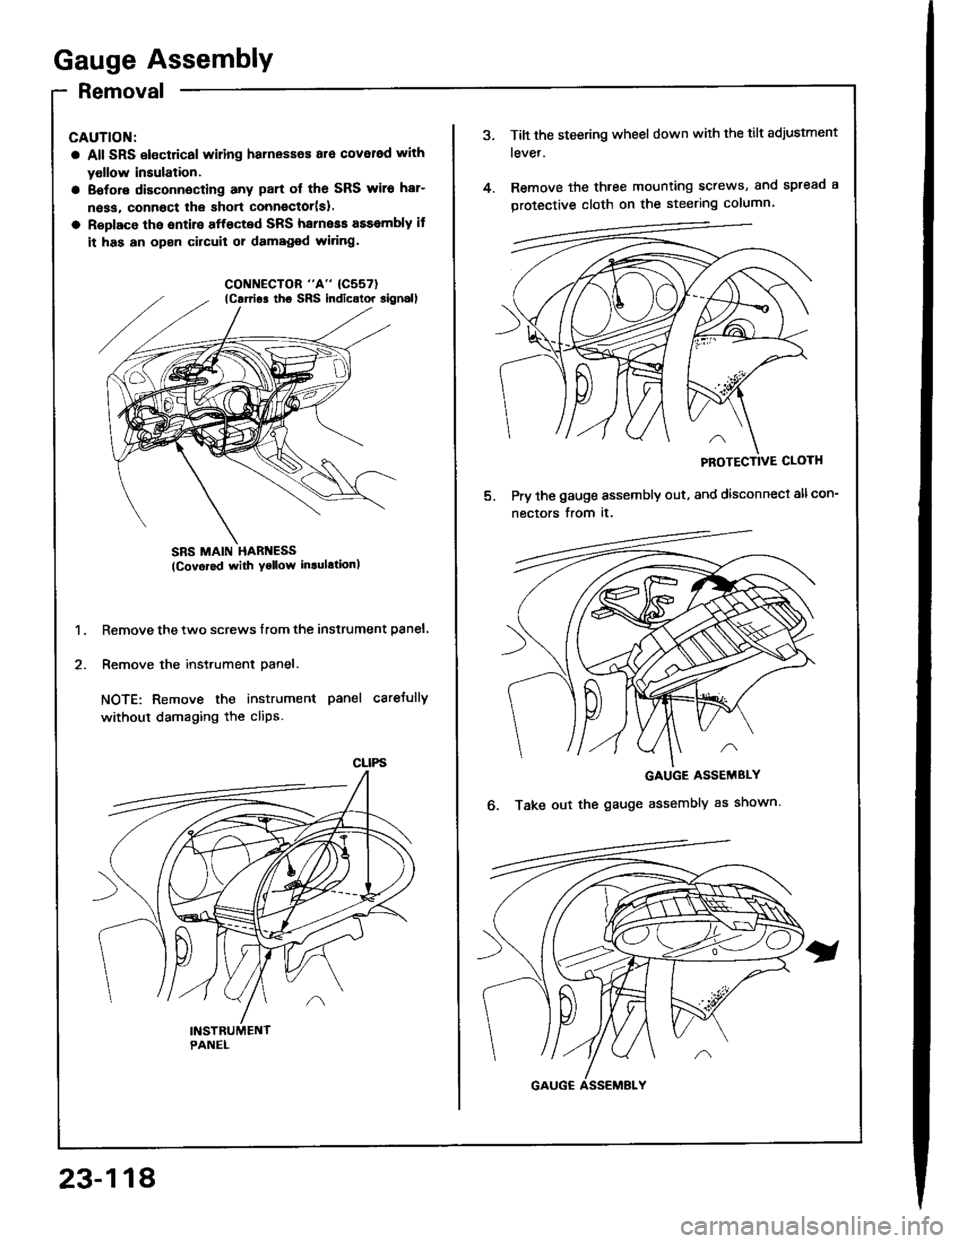 ACURA INTEGRA 1994  Service Repair Manual Gauge Assembly
Removal
CAUTION:
a All SRS electrical wiling harnesses ara cover6d with
yollow insulation.
a Eofore disconnecting any part ol the SRS wiro har-
n6ss, connoct lhe short connector(sl.
a R